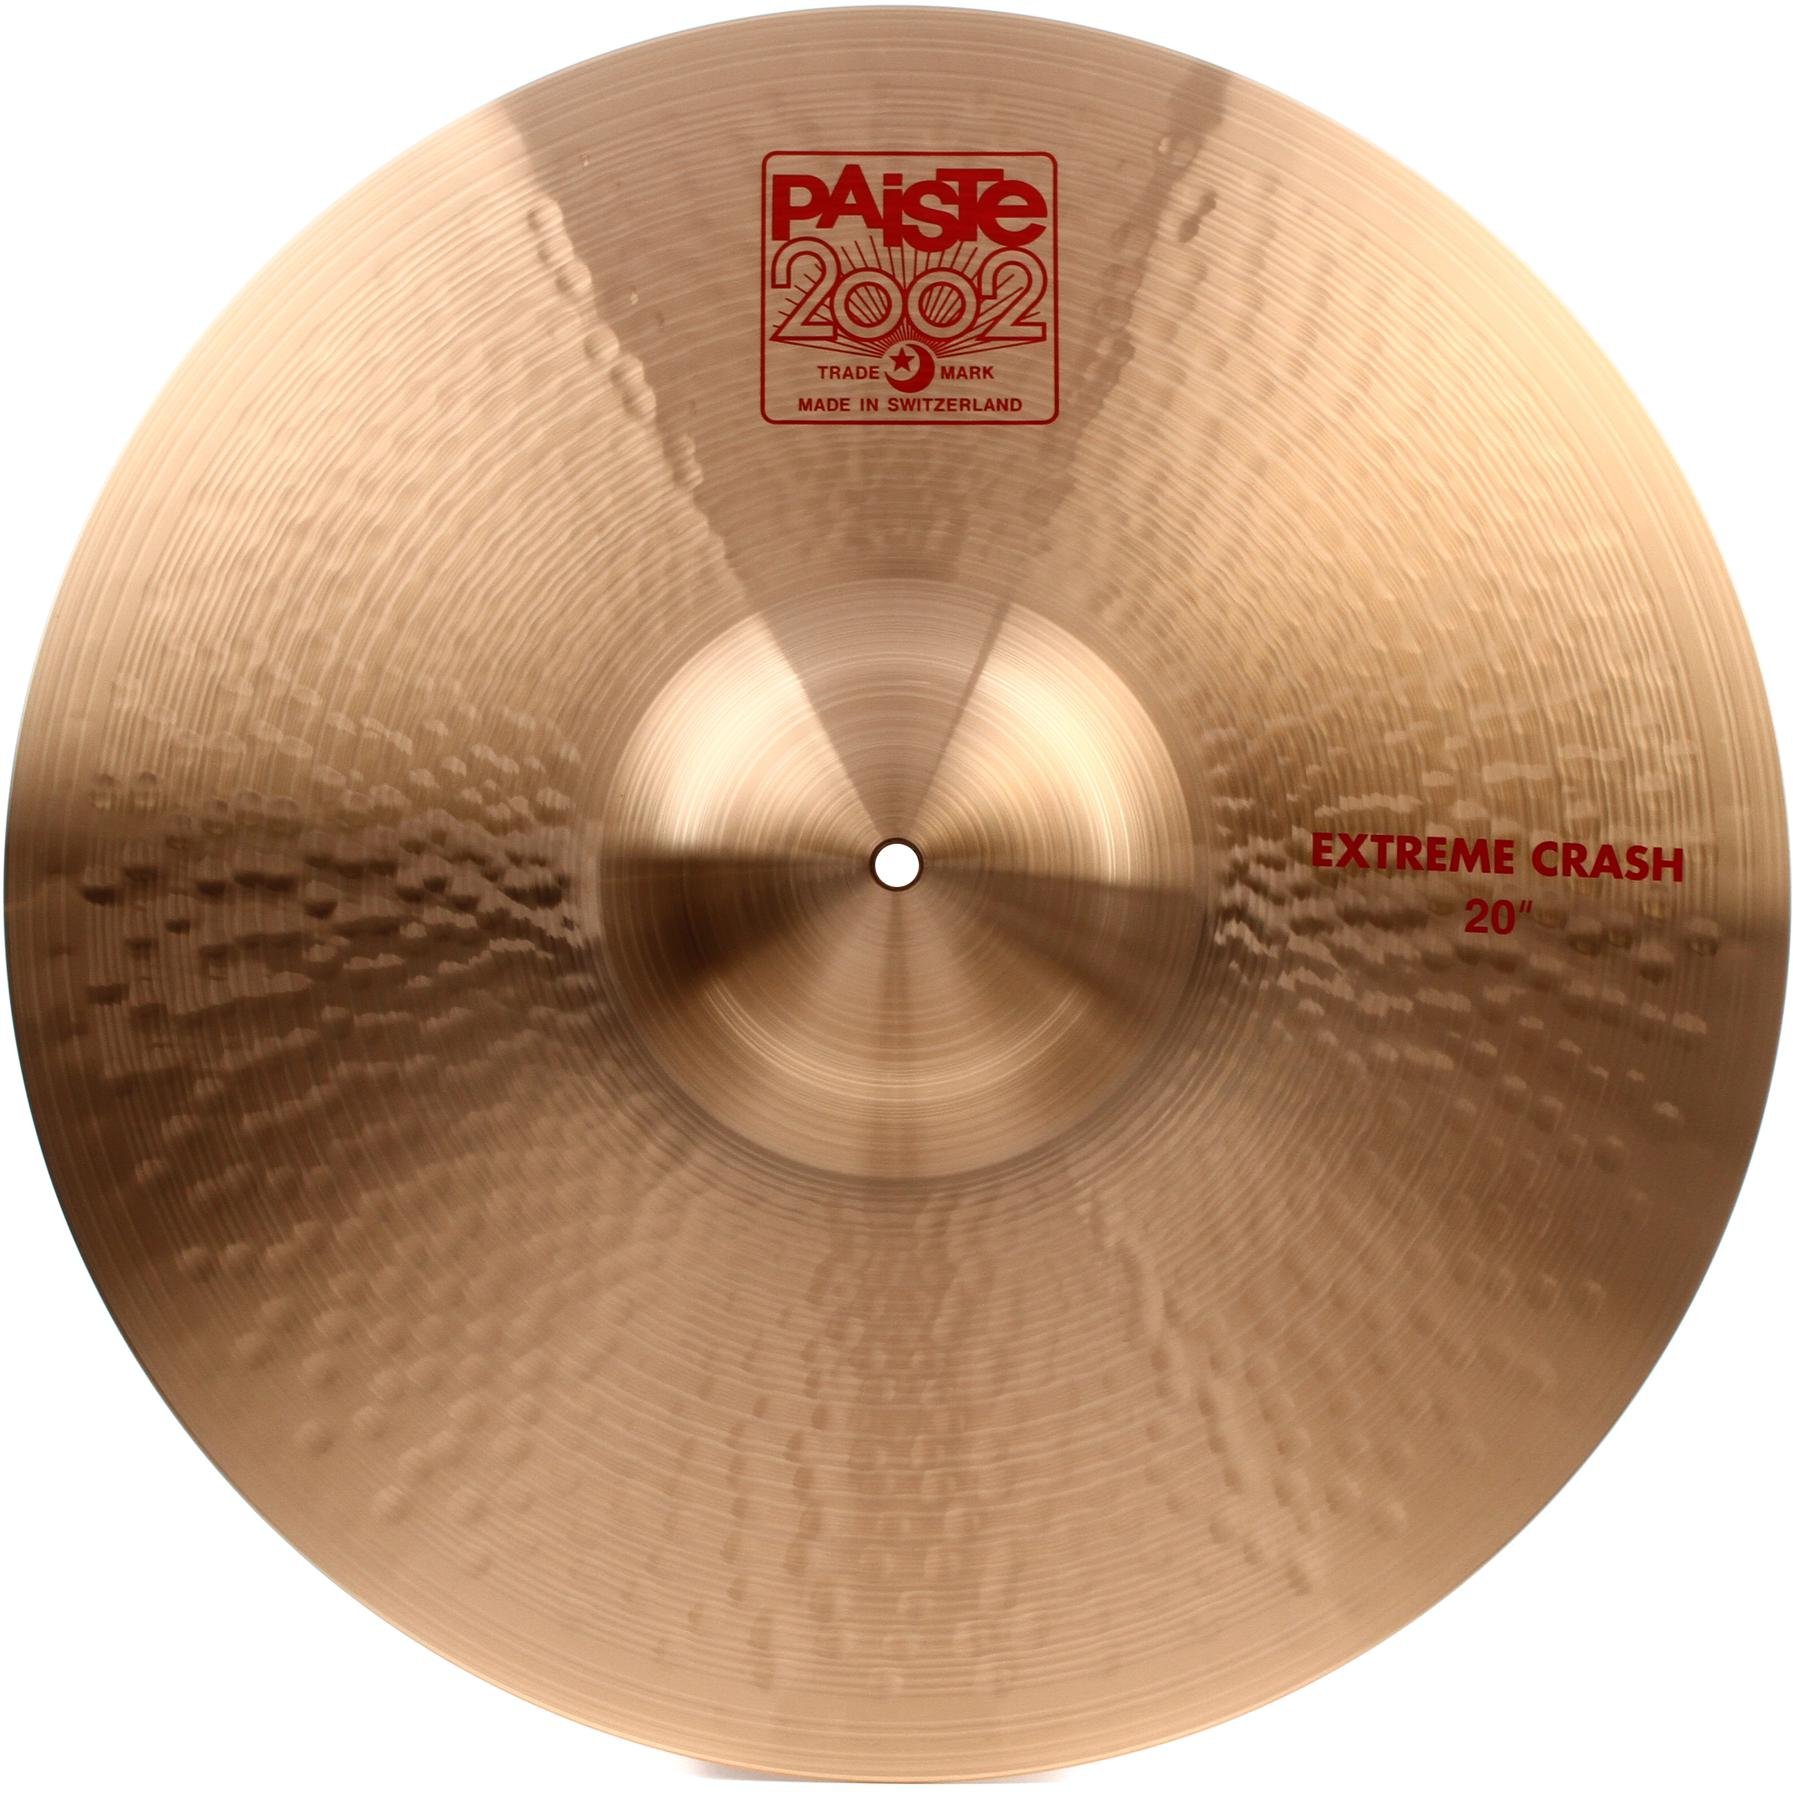 Paiste 20 inch 2002 Extreme Crash Cymbal | Sweetwater